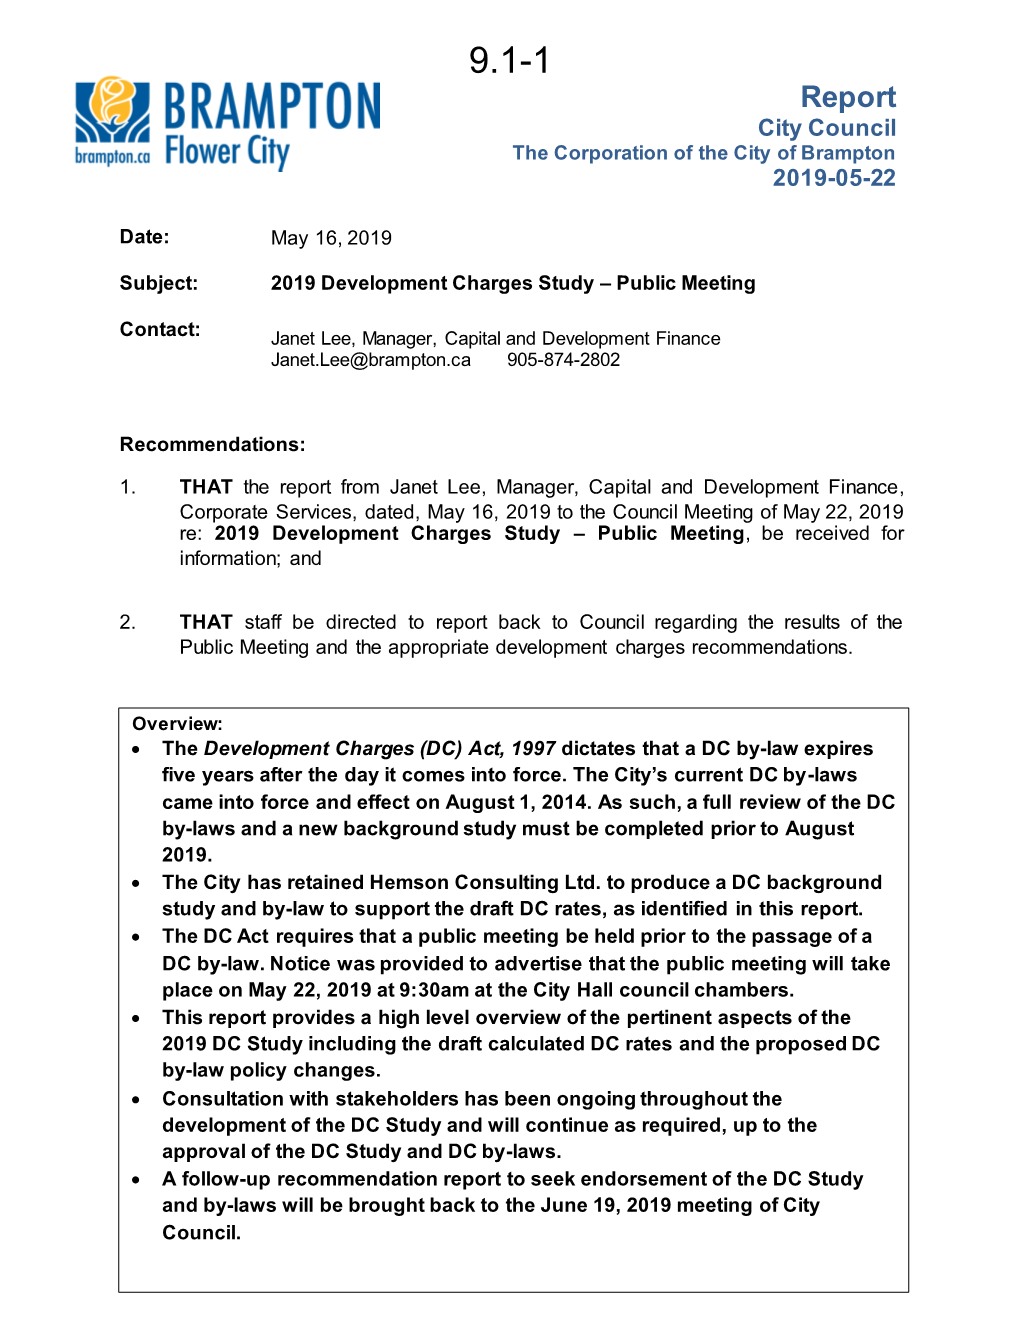 City Council Agenda for May 22, 2019